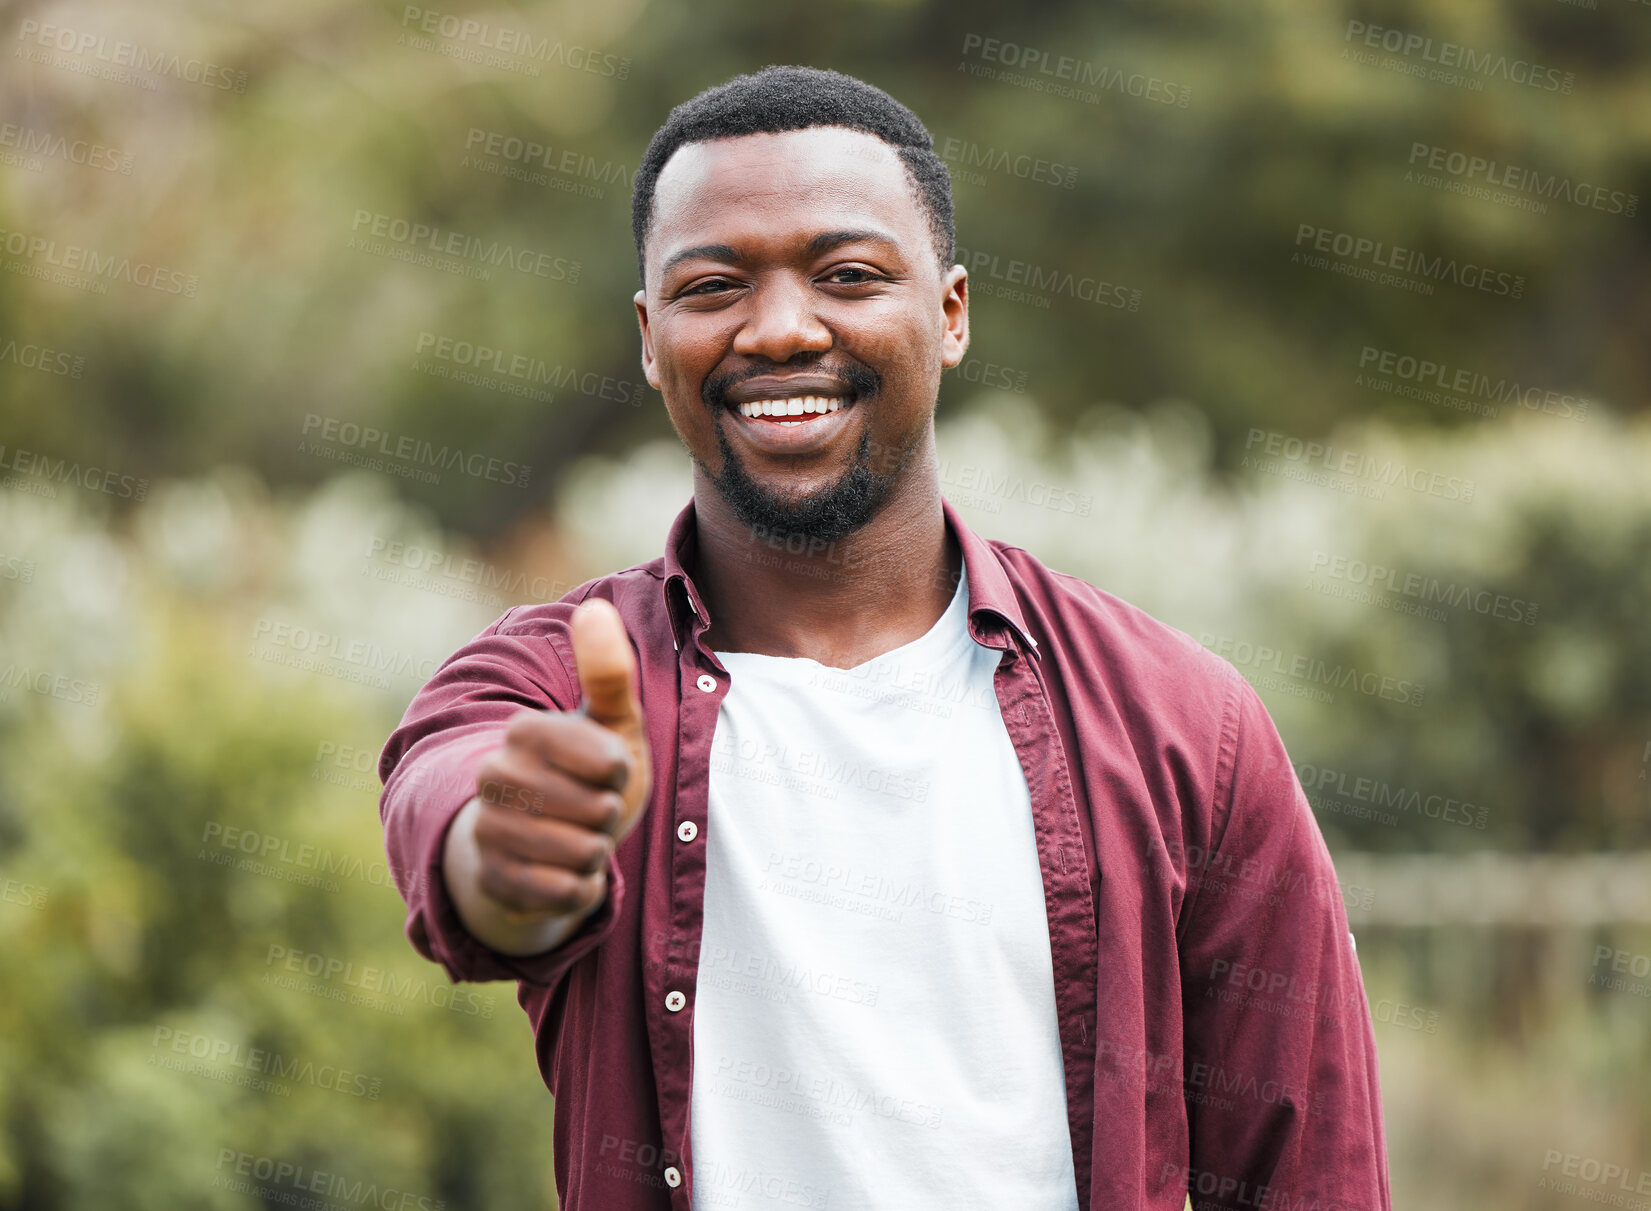 Buy stock photo Shot of a young man giving the thumbs up in his yard